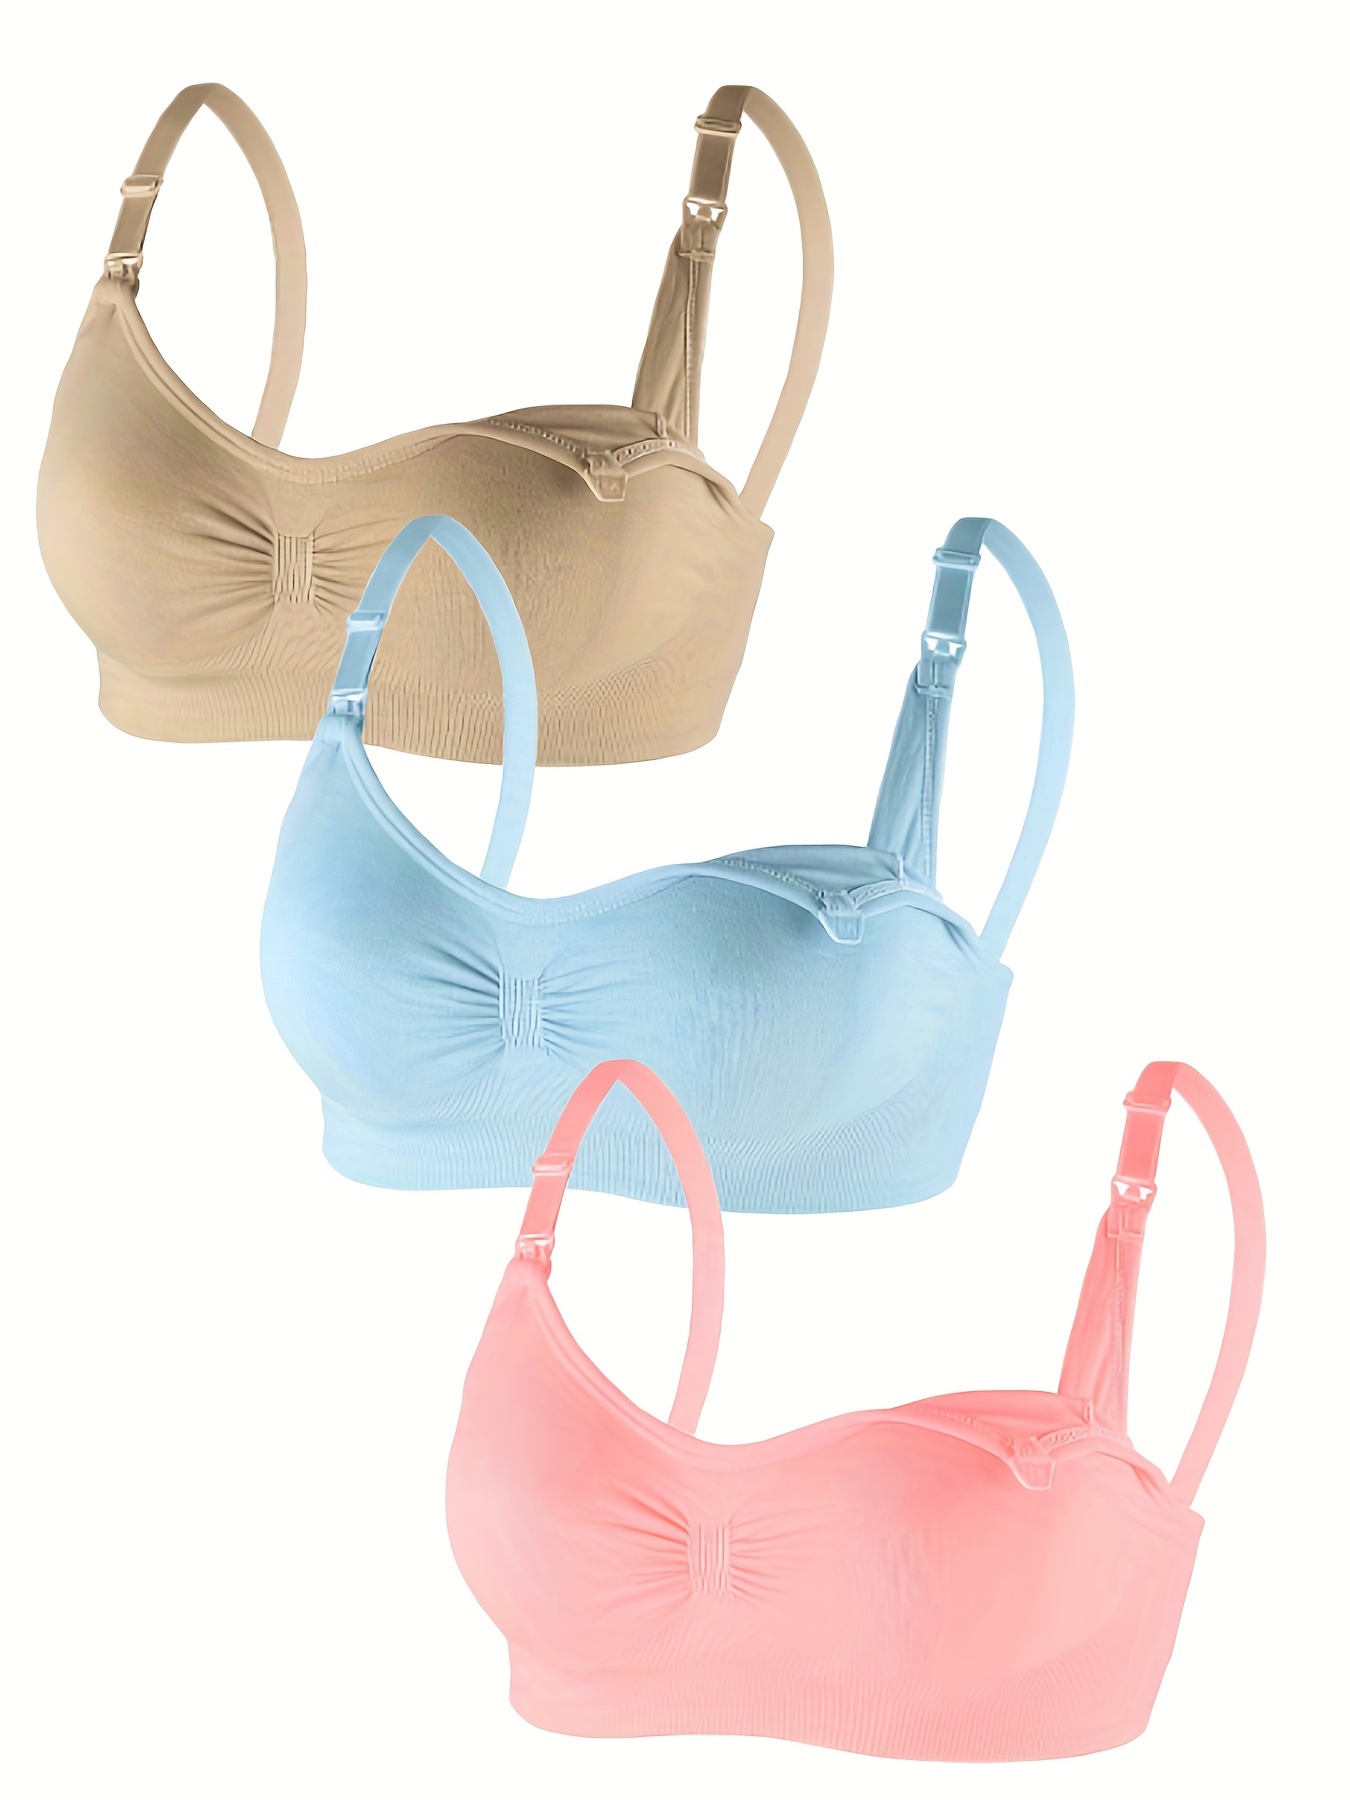 Women's Push Up Bra without Steel Ring Front with Open Buckle